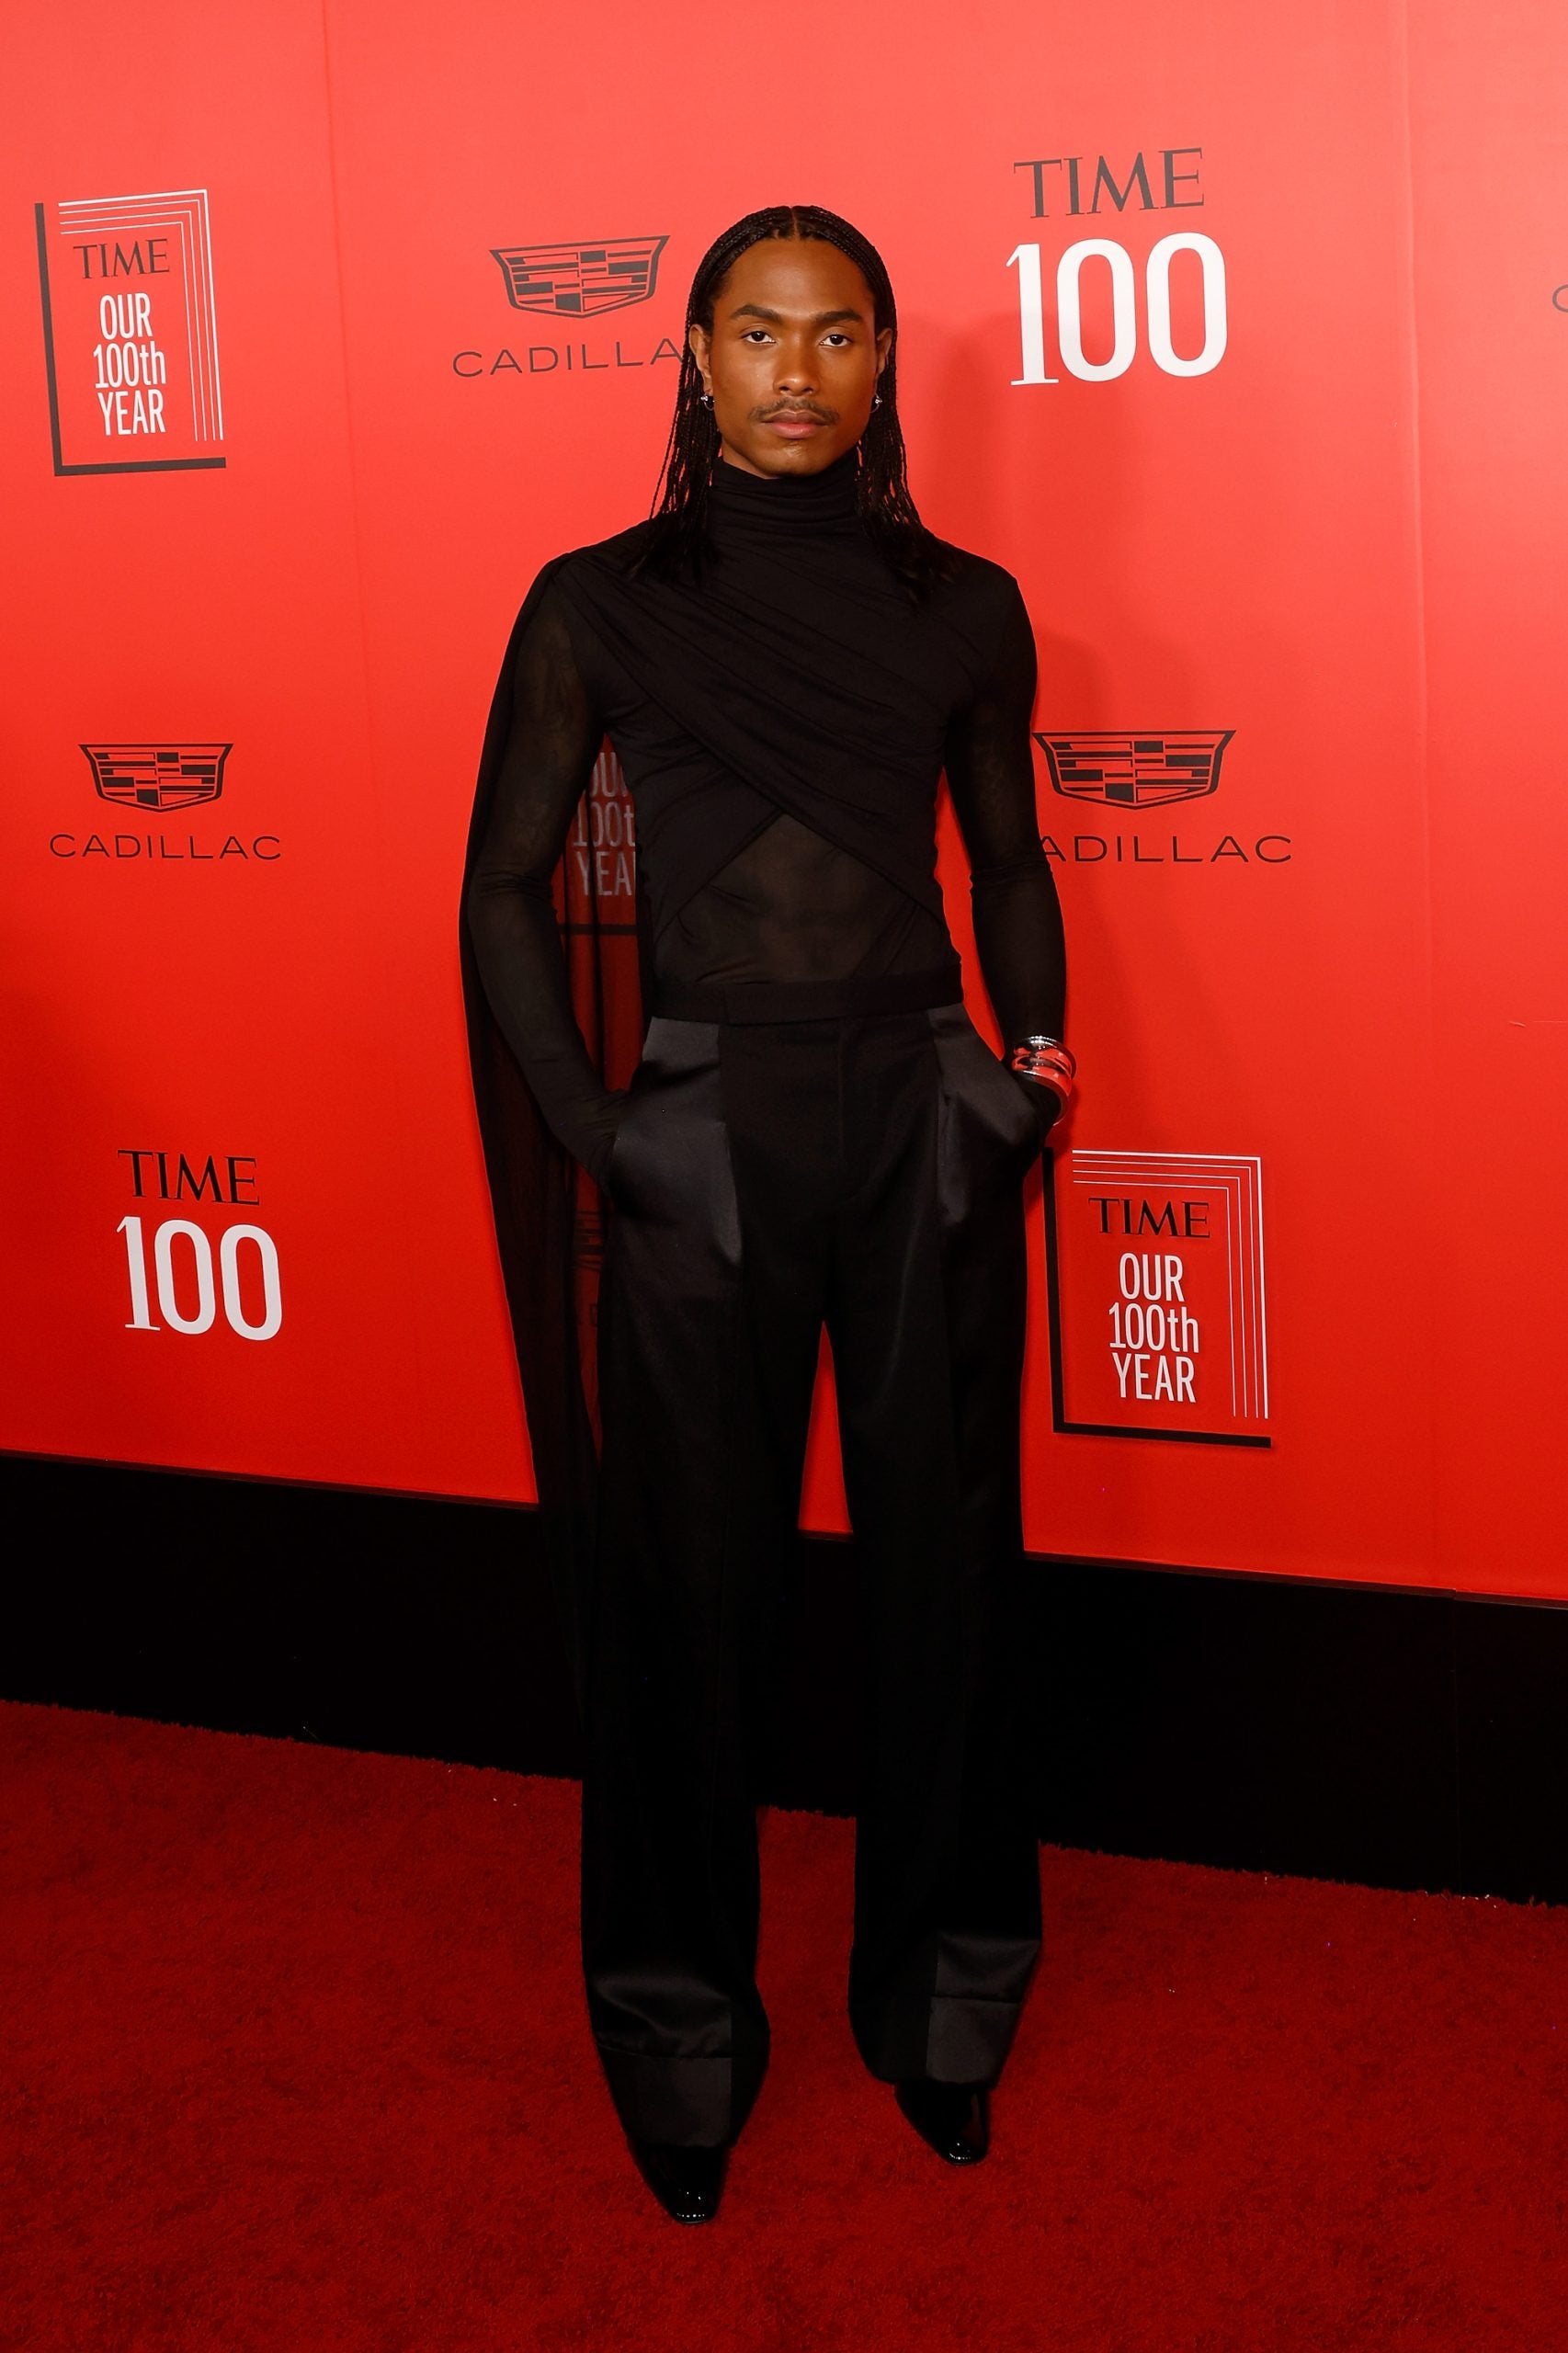 Red Carpet Roundup: Time 100, Tiffany NYC Flagship Opening, CinemaCon, And The Prince's Trust Gala